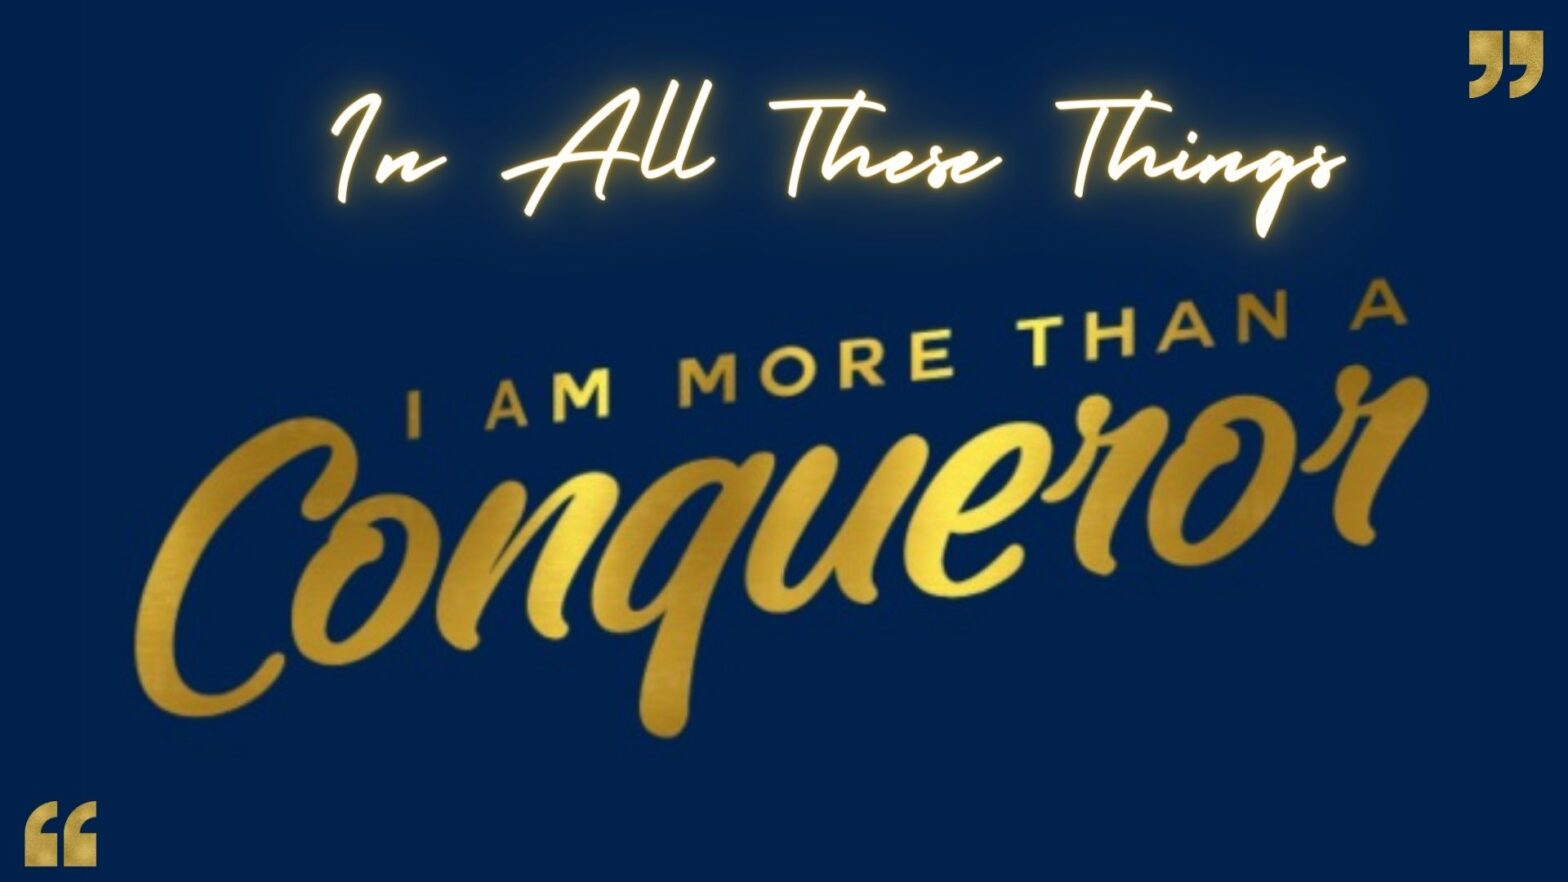 I’m All These Things – I’m More Than A Conqueror